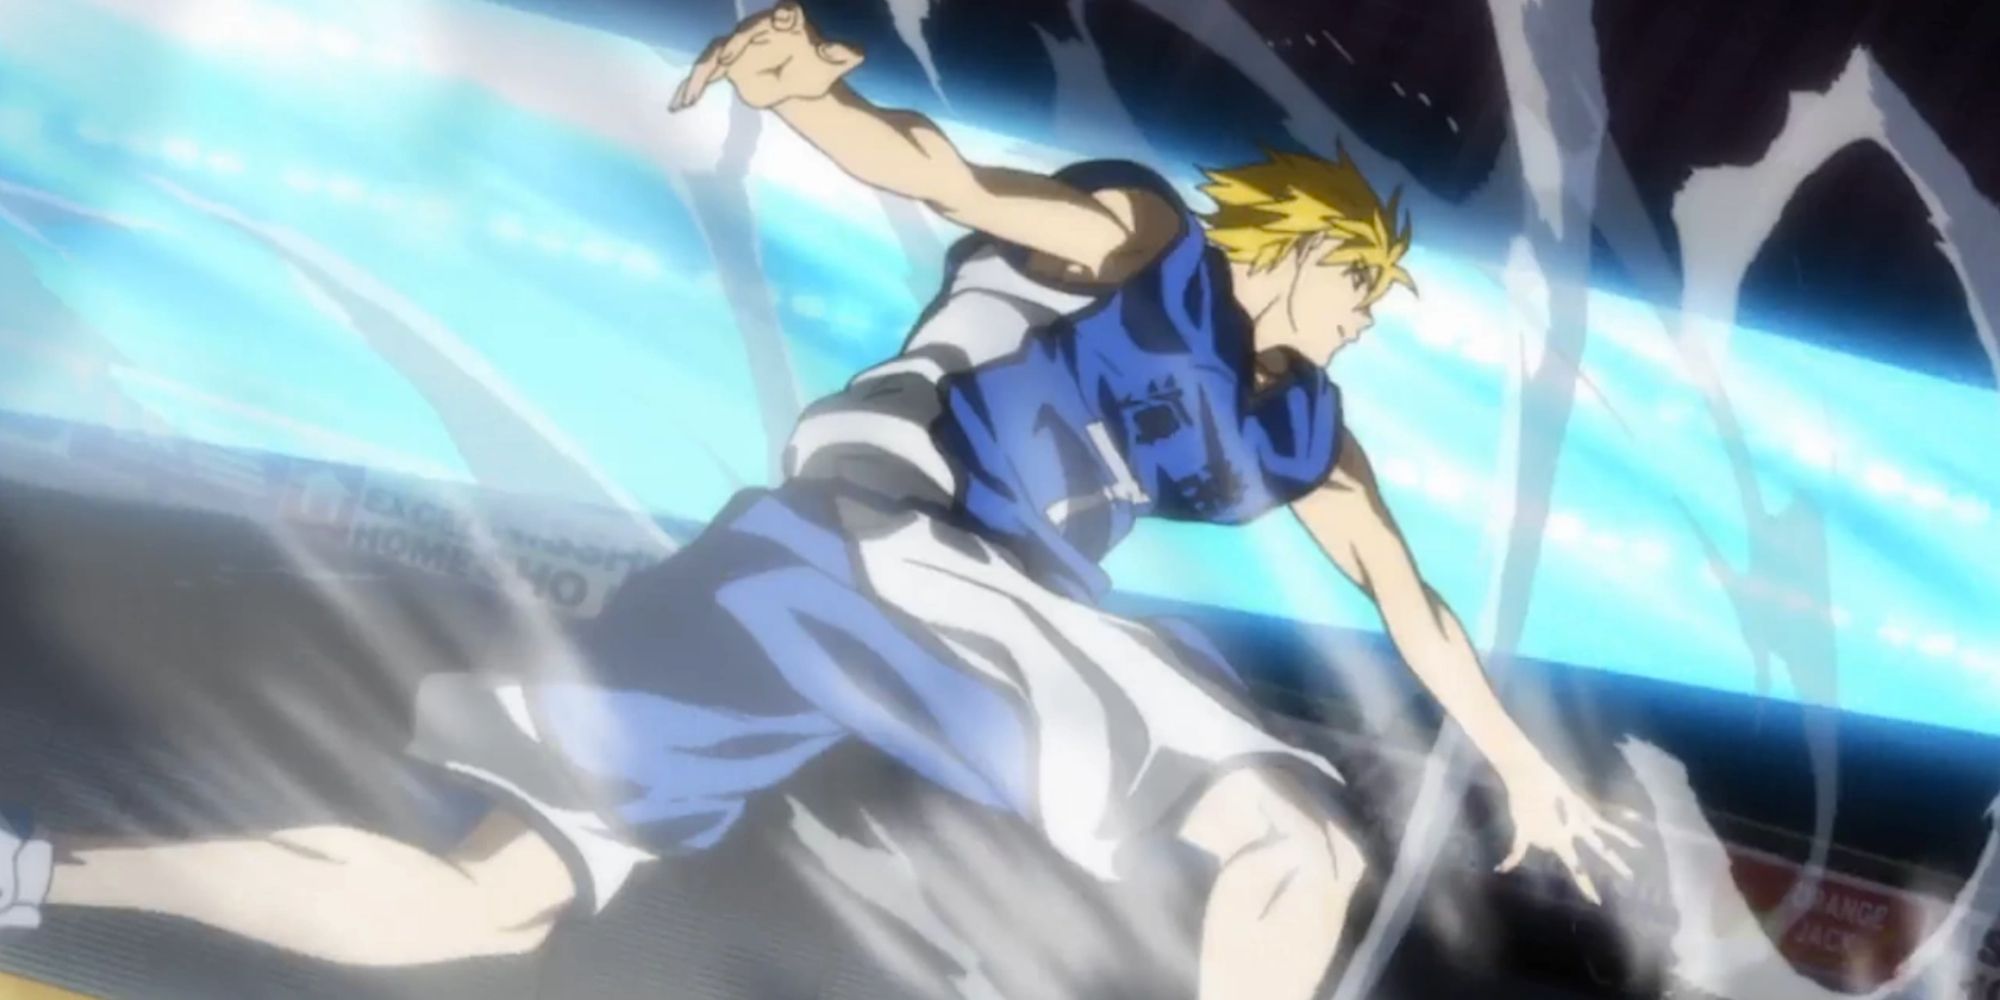 kise using perfect copy